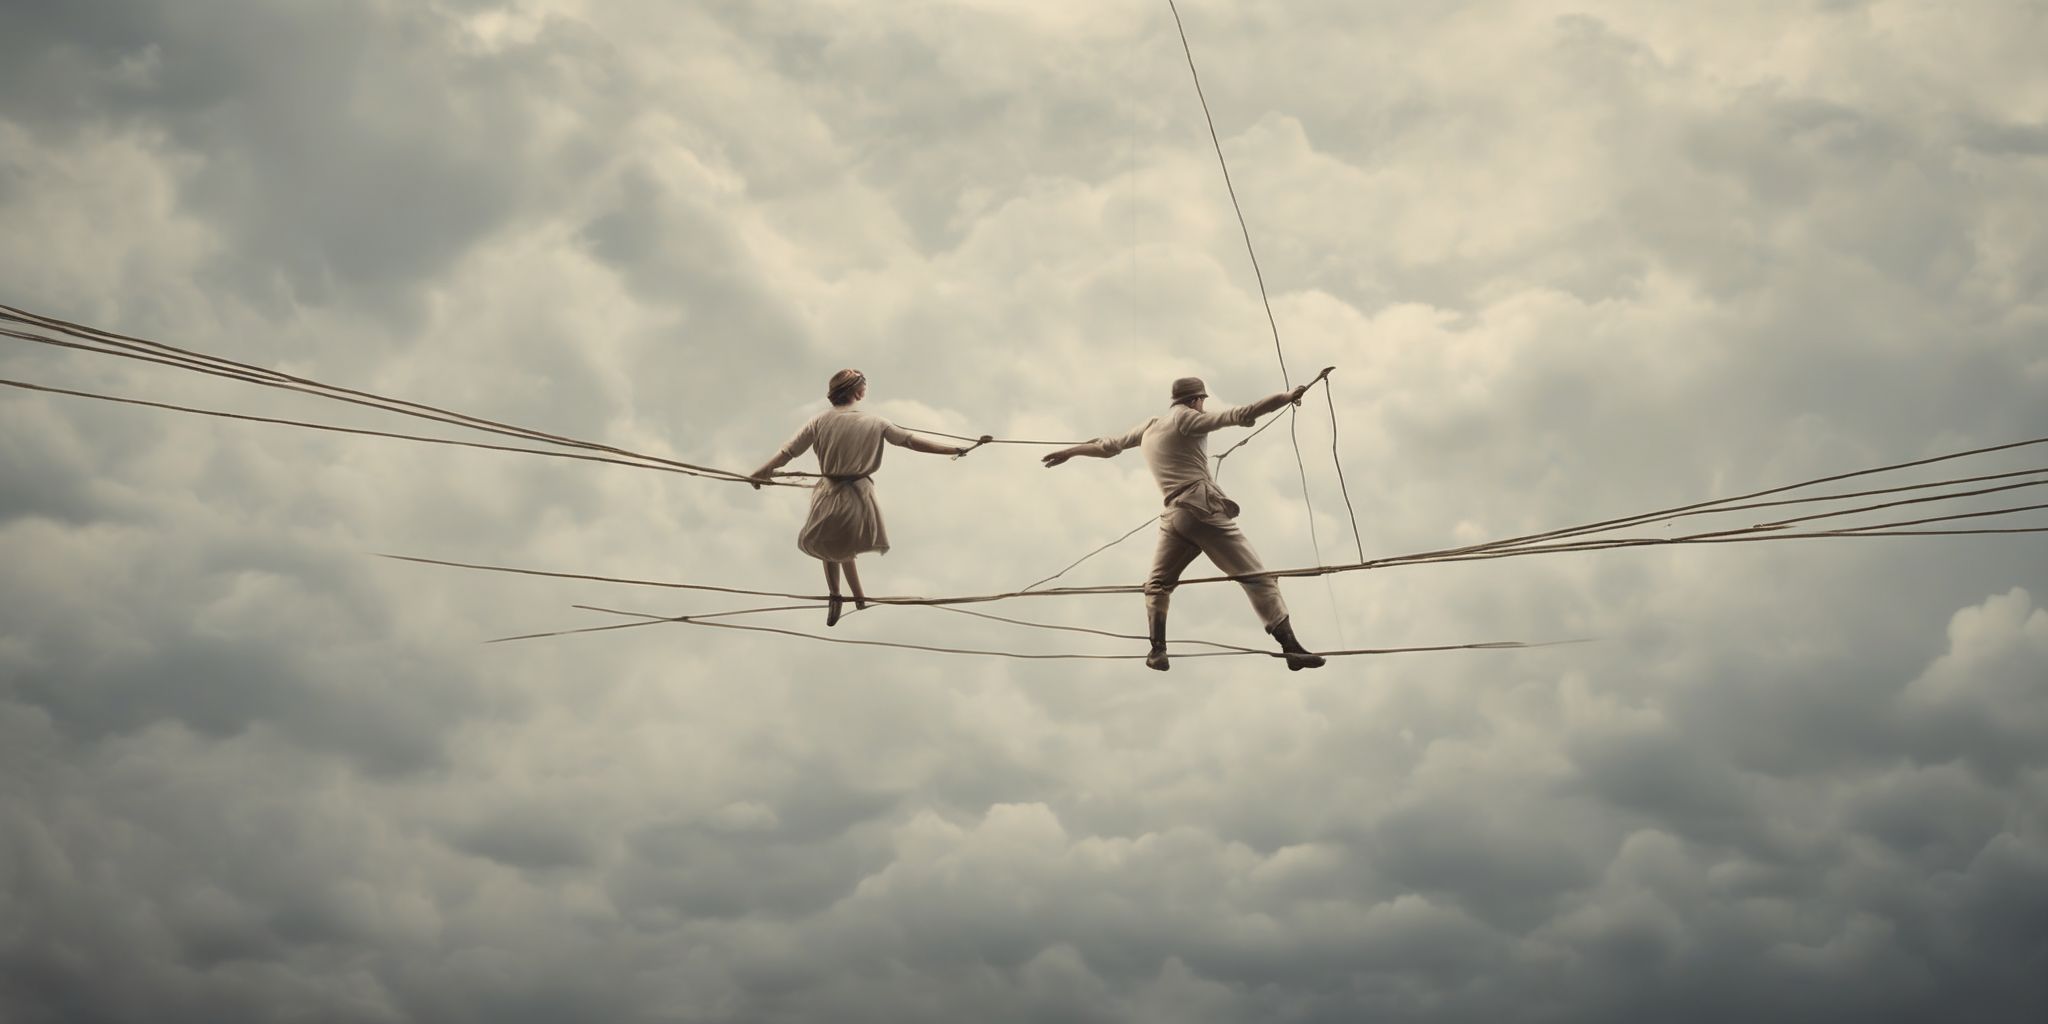 Tightrope  in realistic, photographic style